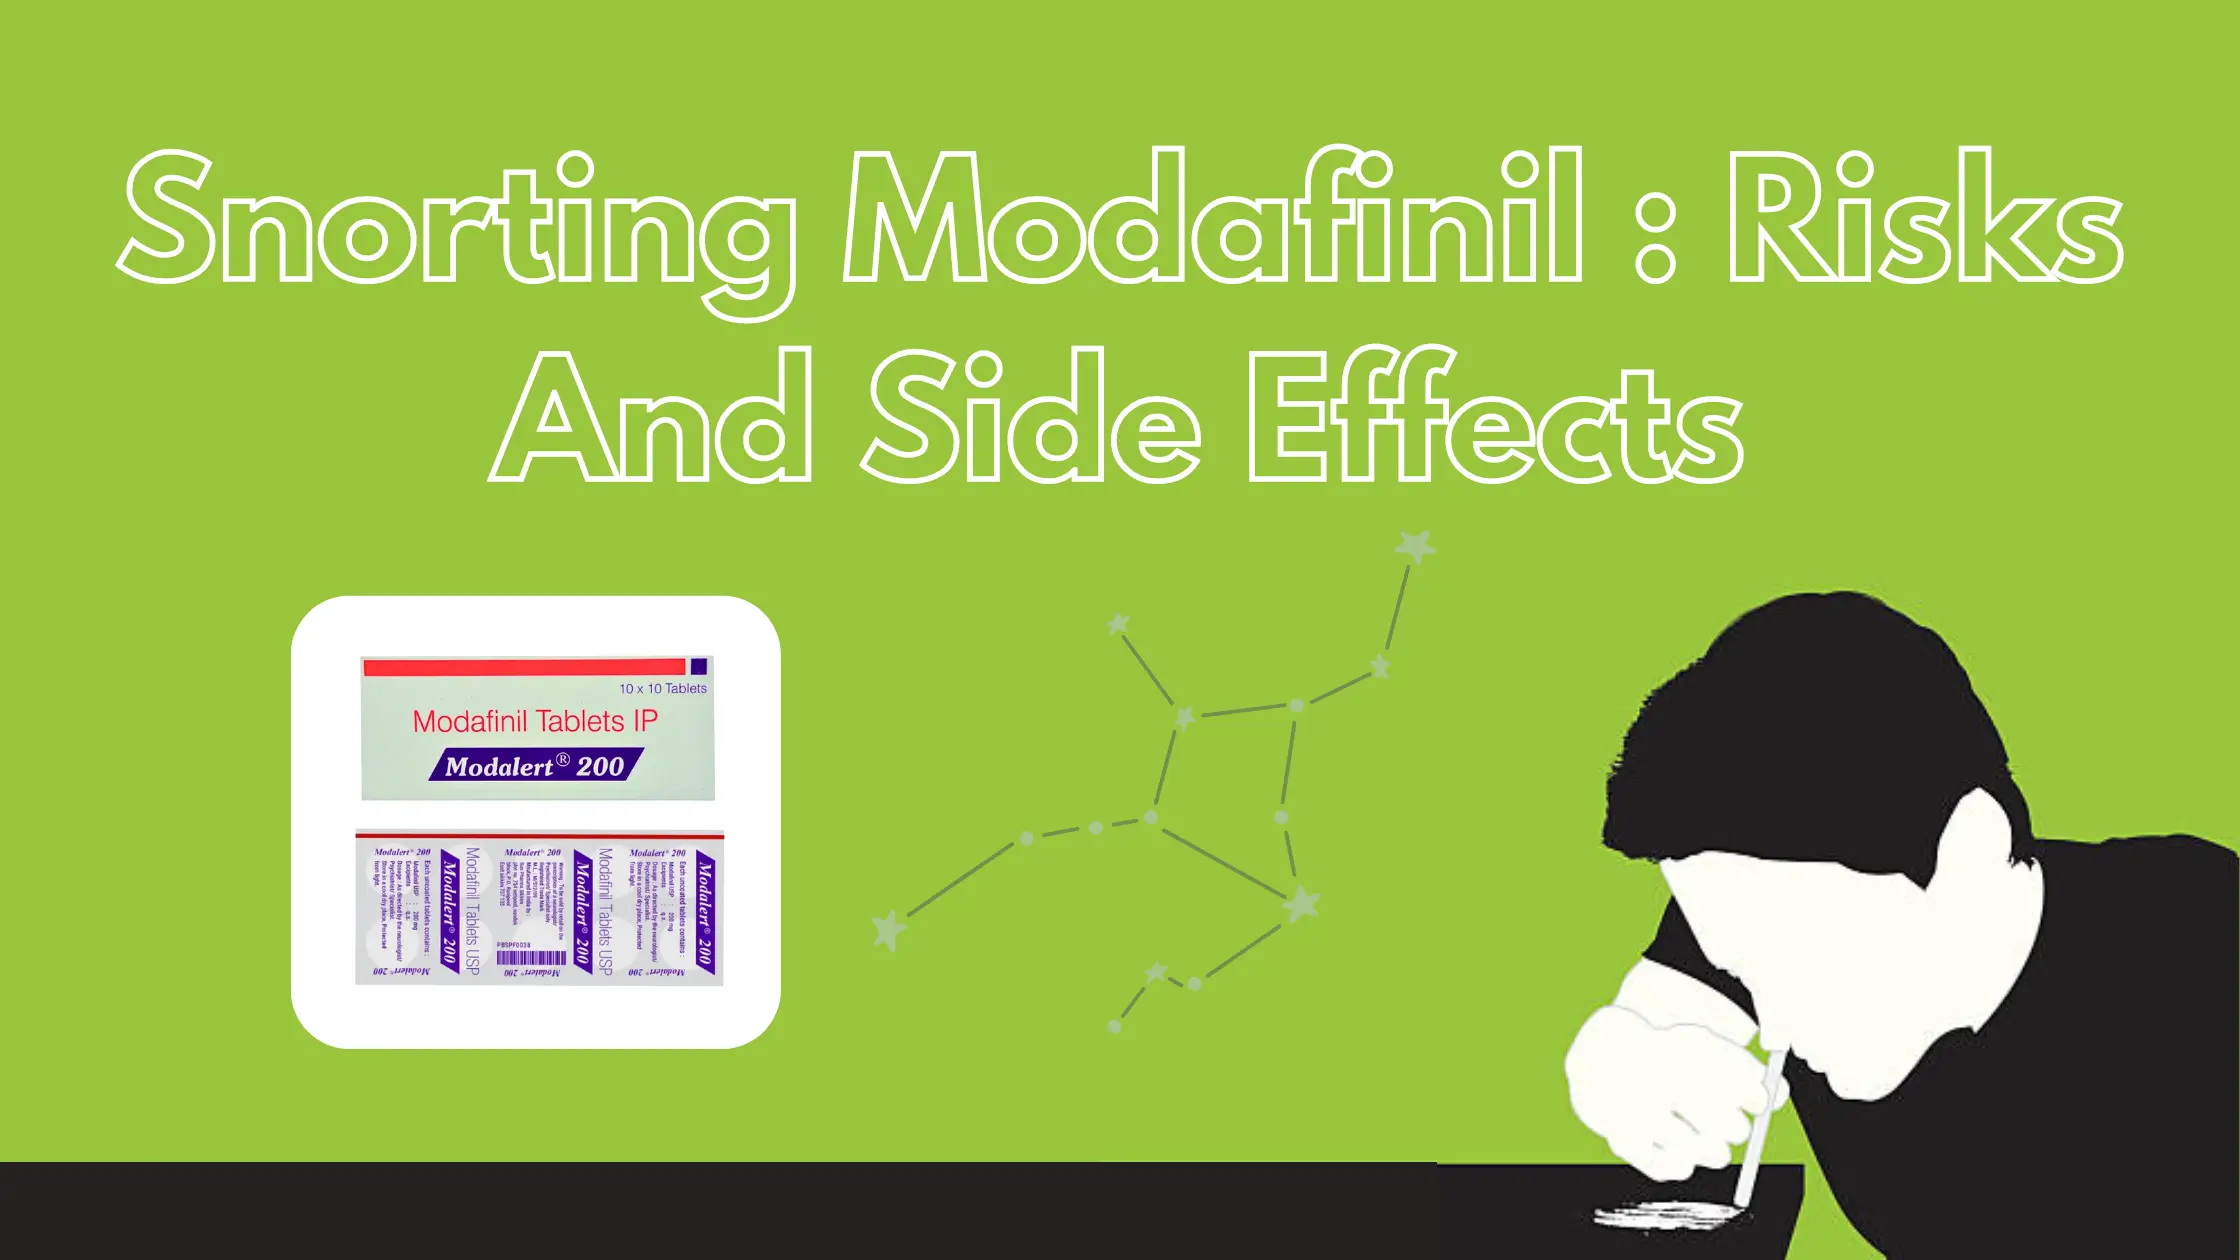 snorting-modafinil-risks-and-side-effects